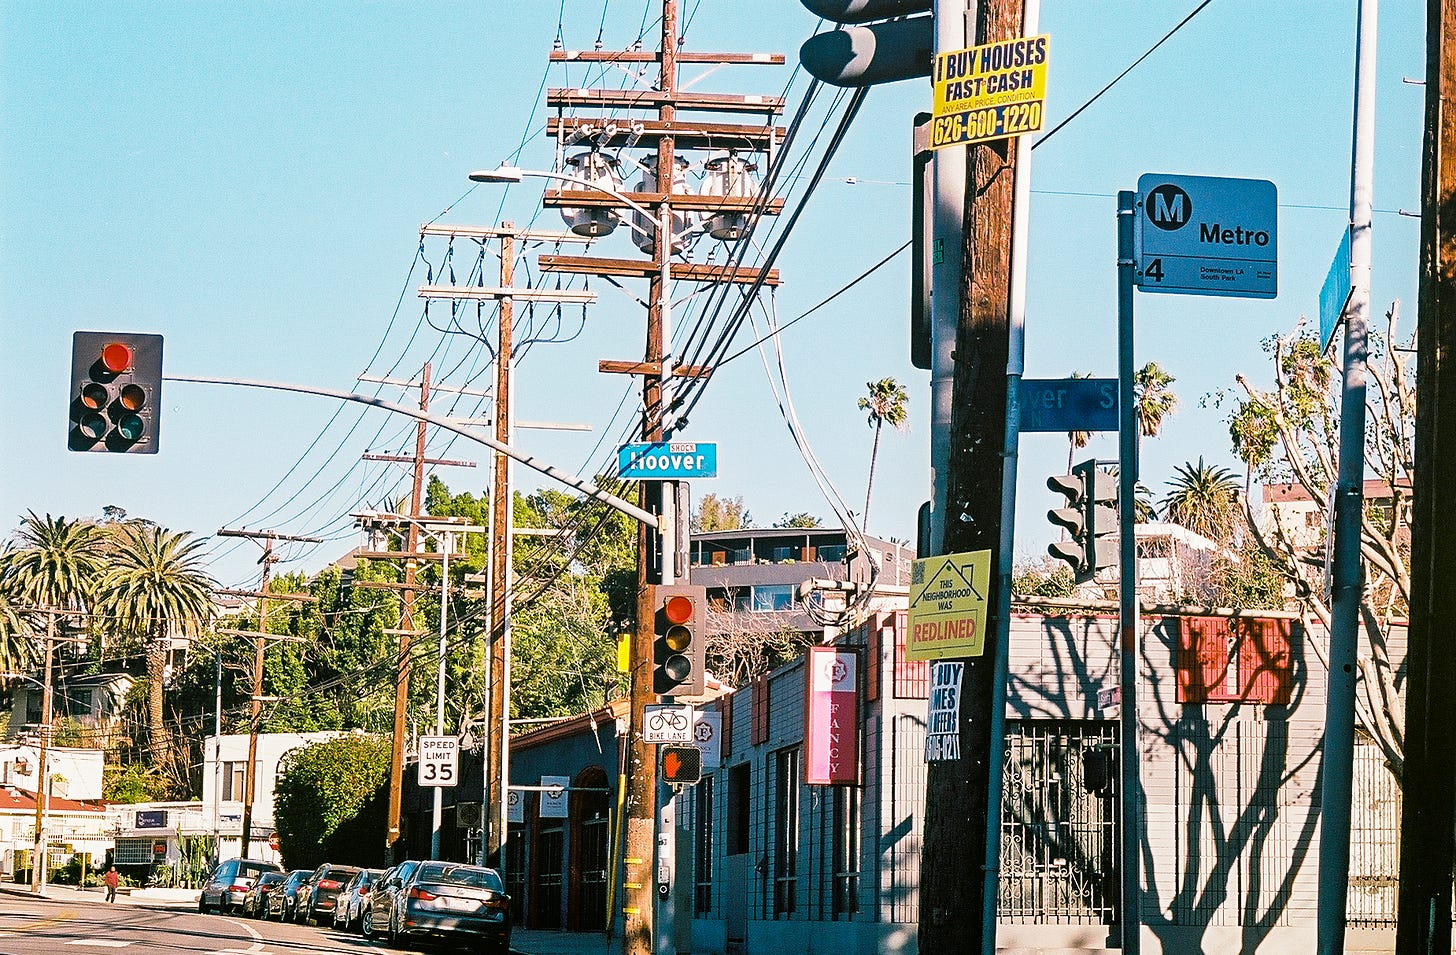 Photograph of the intersection of Santa Monica Blvd and Hoover with businesses, trees, and traffic signals. On the right hand side of the frame is a wooden pole with a sign that says “I Buy Houses Fast Cash” on the top and one of my signs on the bottom. 